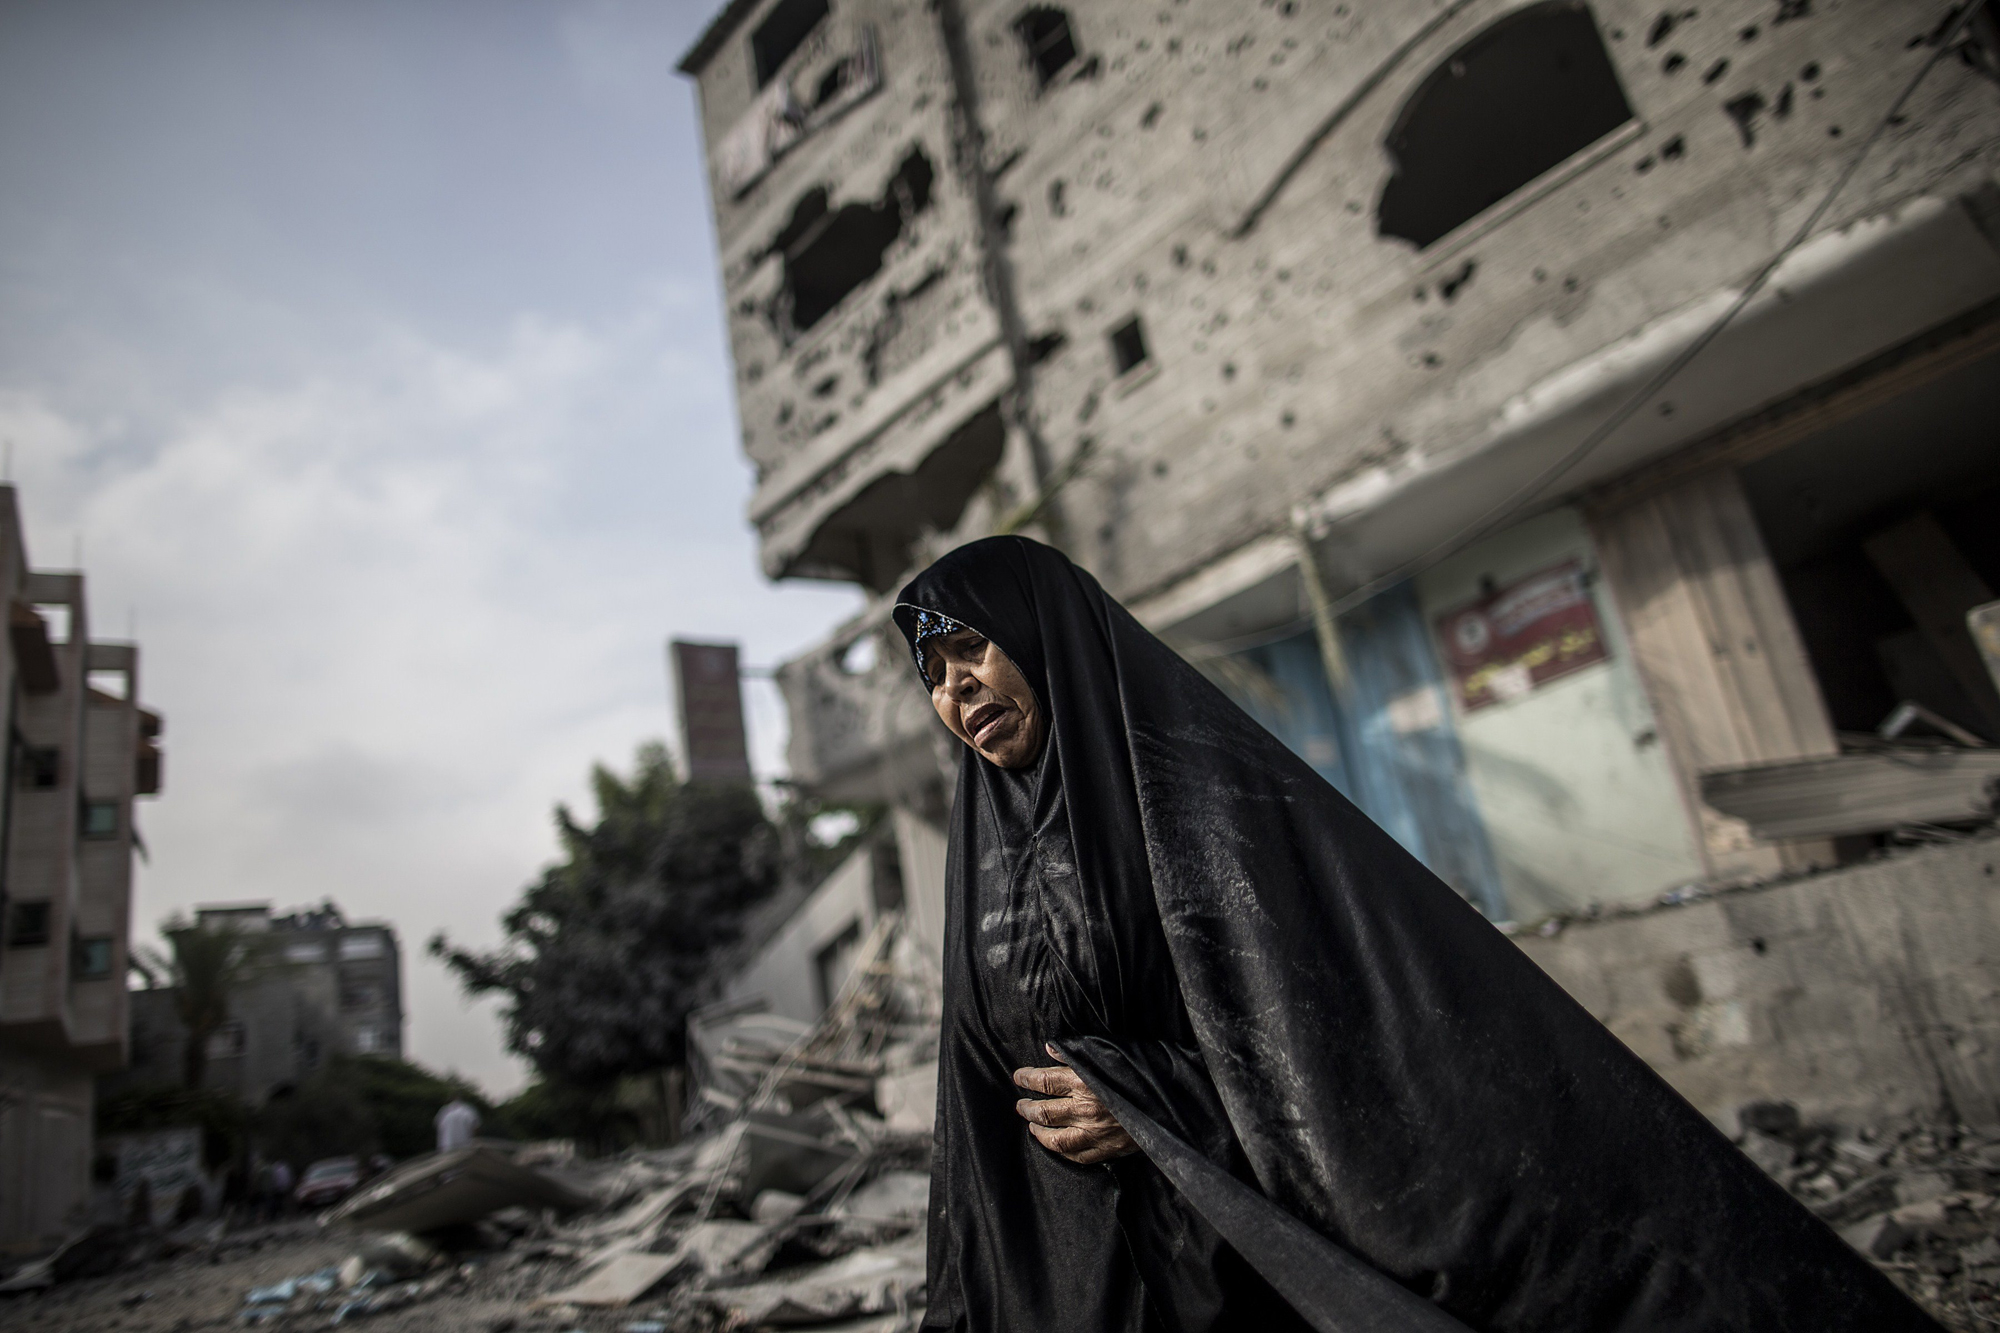 A Palestinian woman stands in front of buildings damaged by Israeli bombardment in the Jabalia district of the northern Gaza Strip on July 24, 2014.